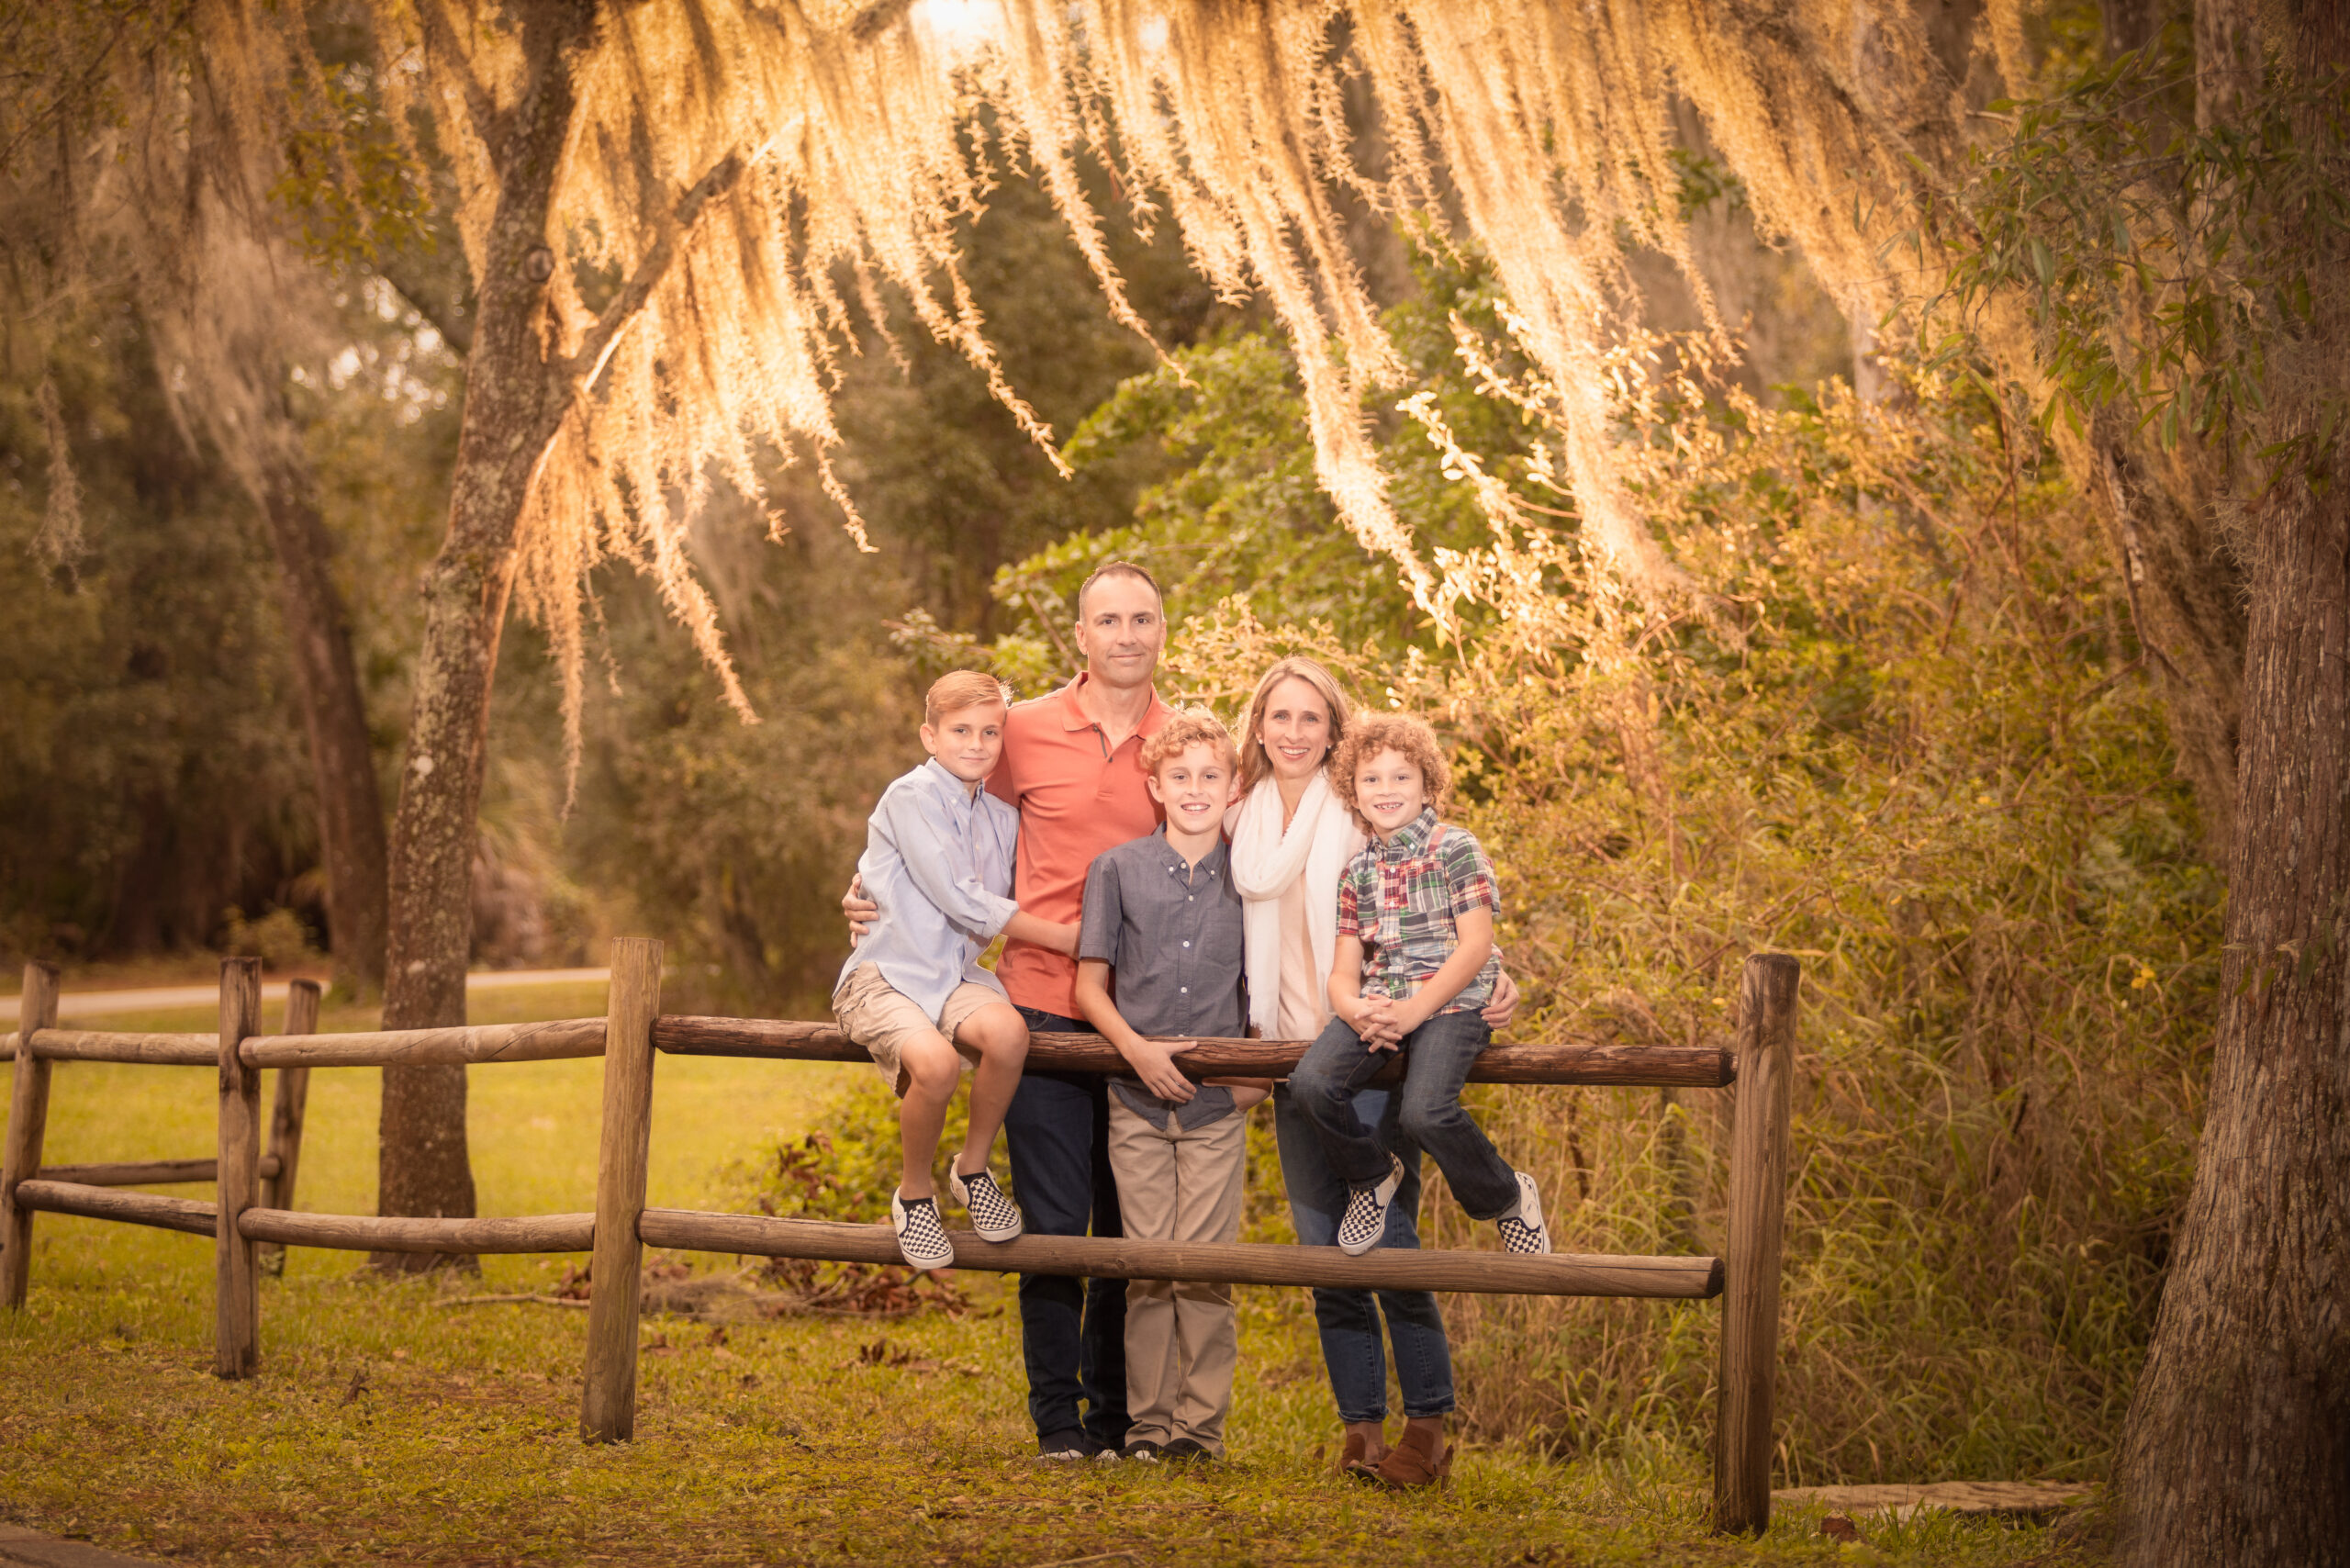 family of 5 hanging out in a park in Tampa under beautiful tress